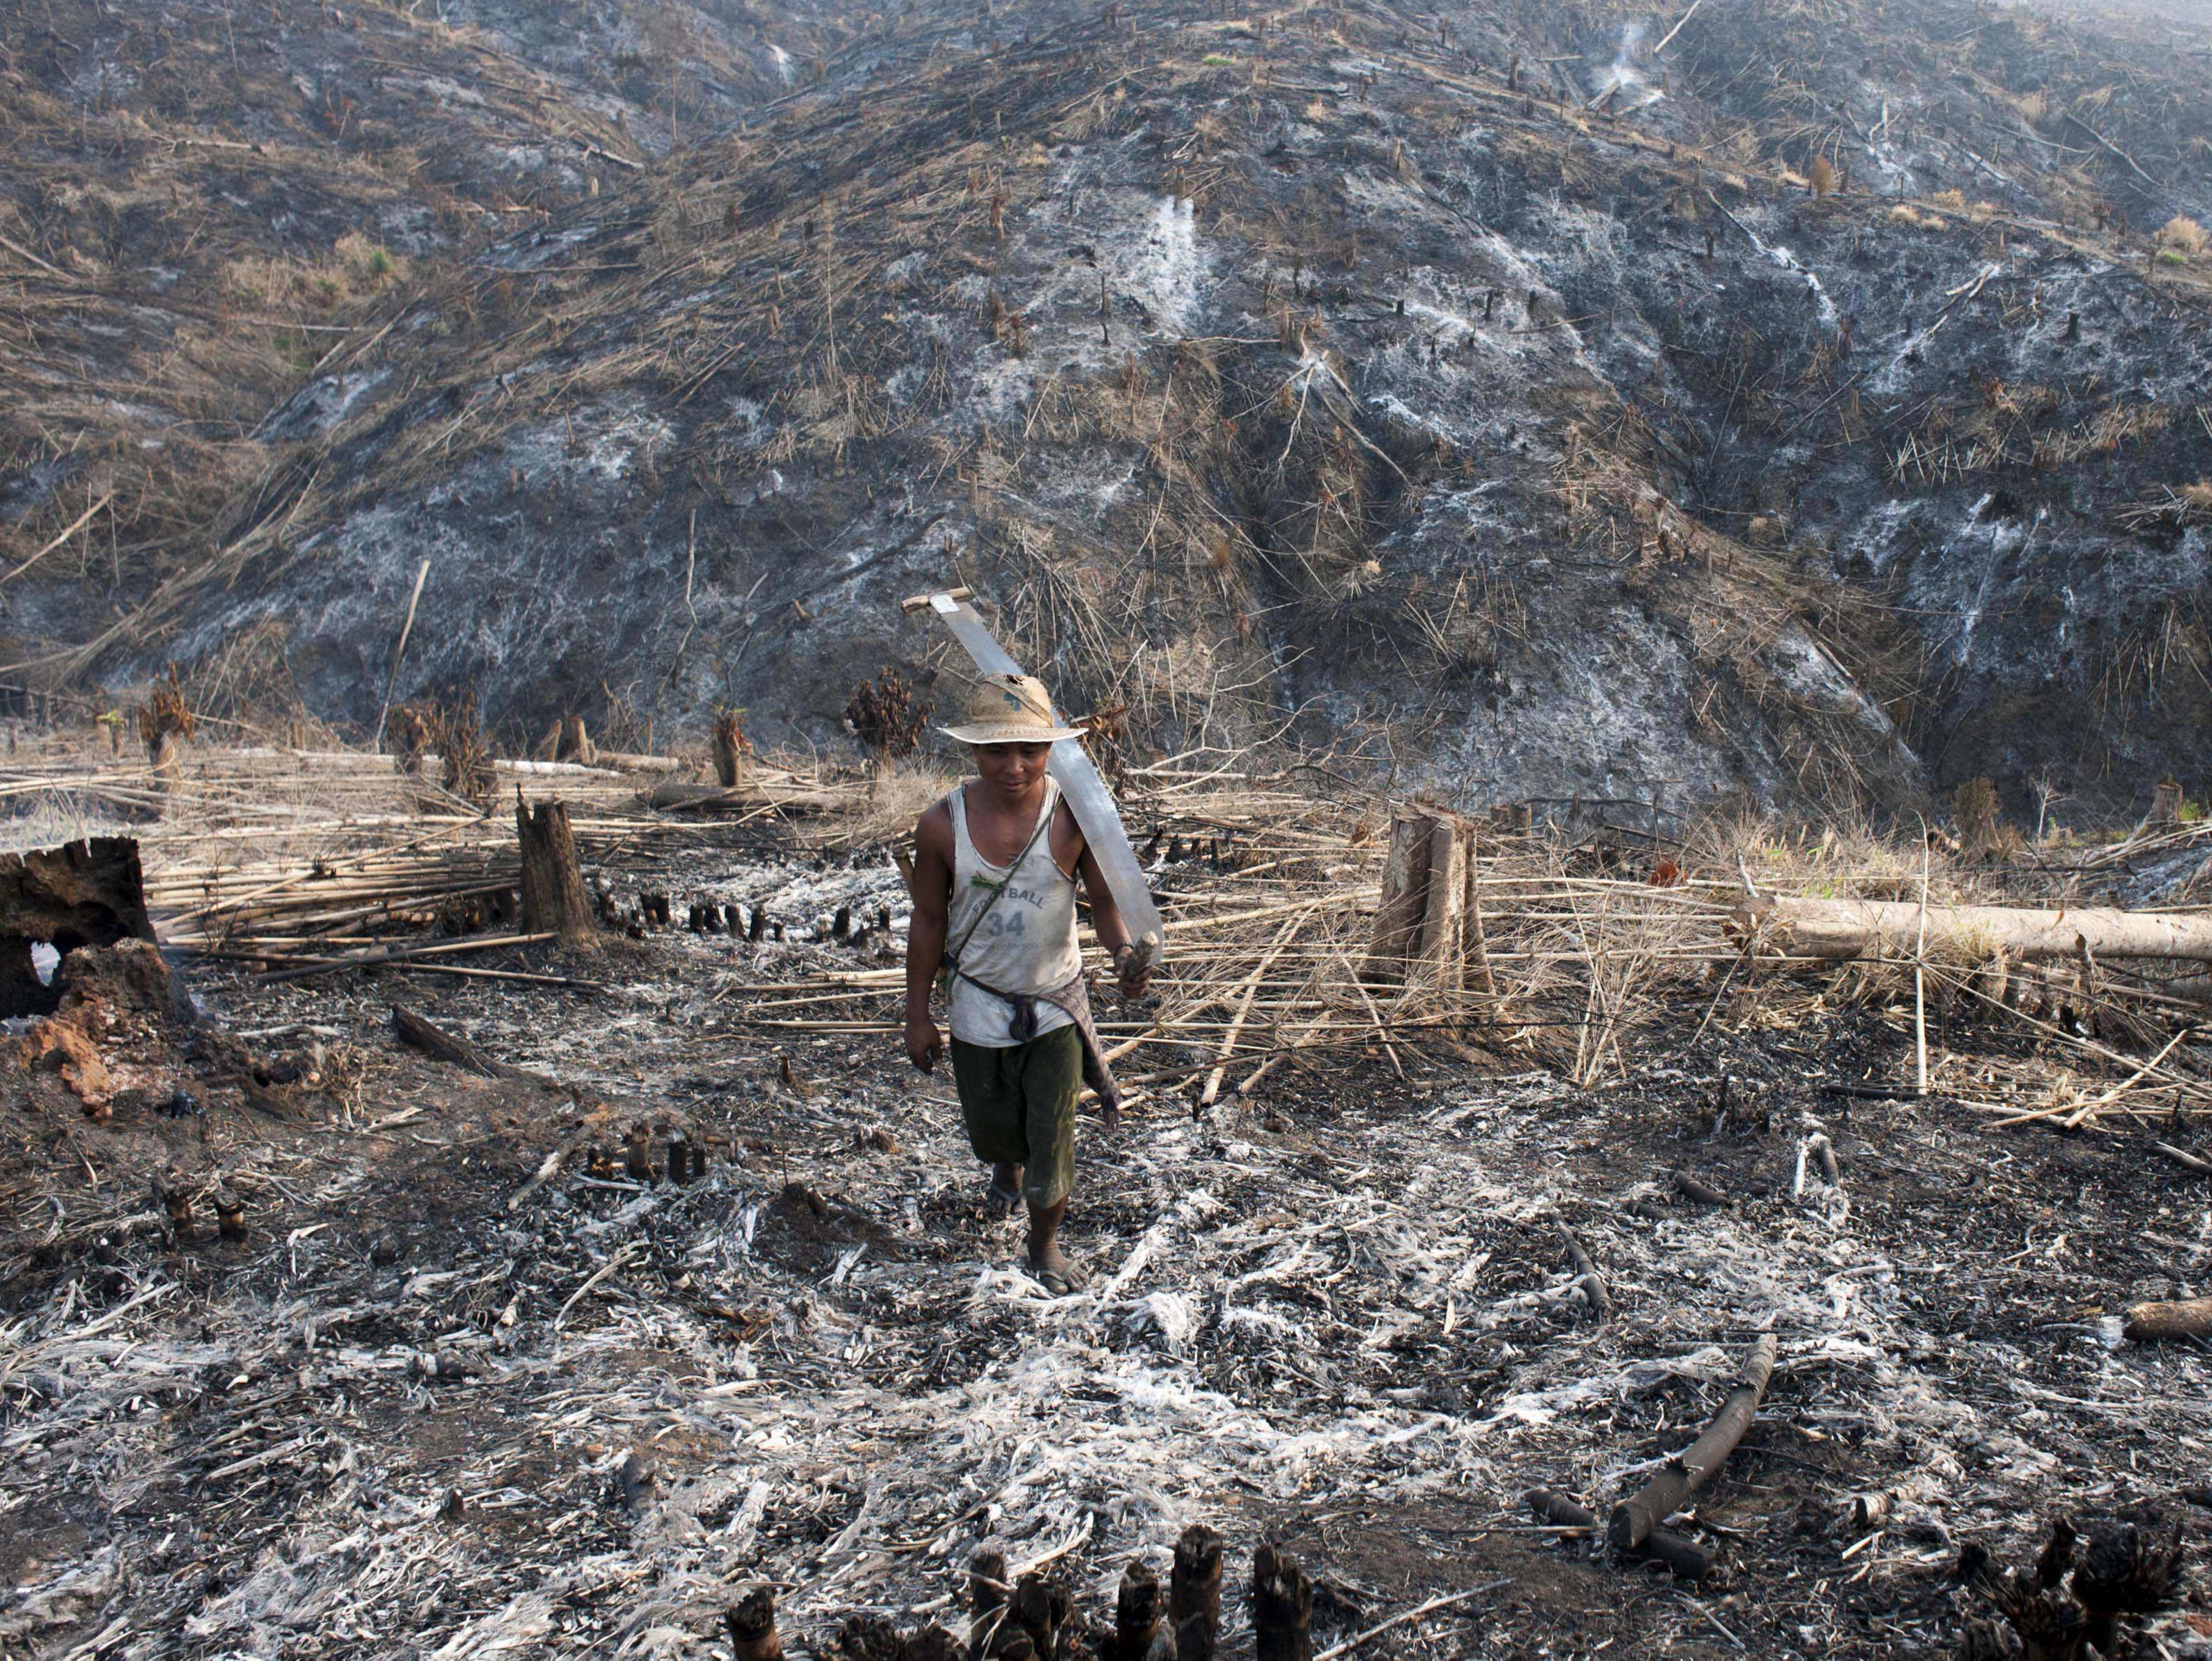 A worker carrying a saw where teak trees once grew in the Bago Region of Myanmar after the land was scorched ahead of replanting